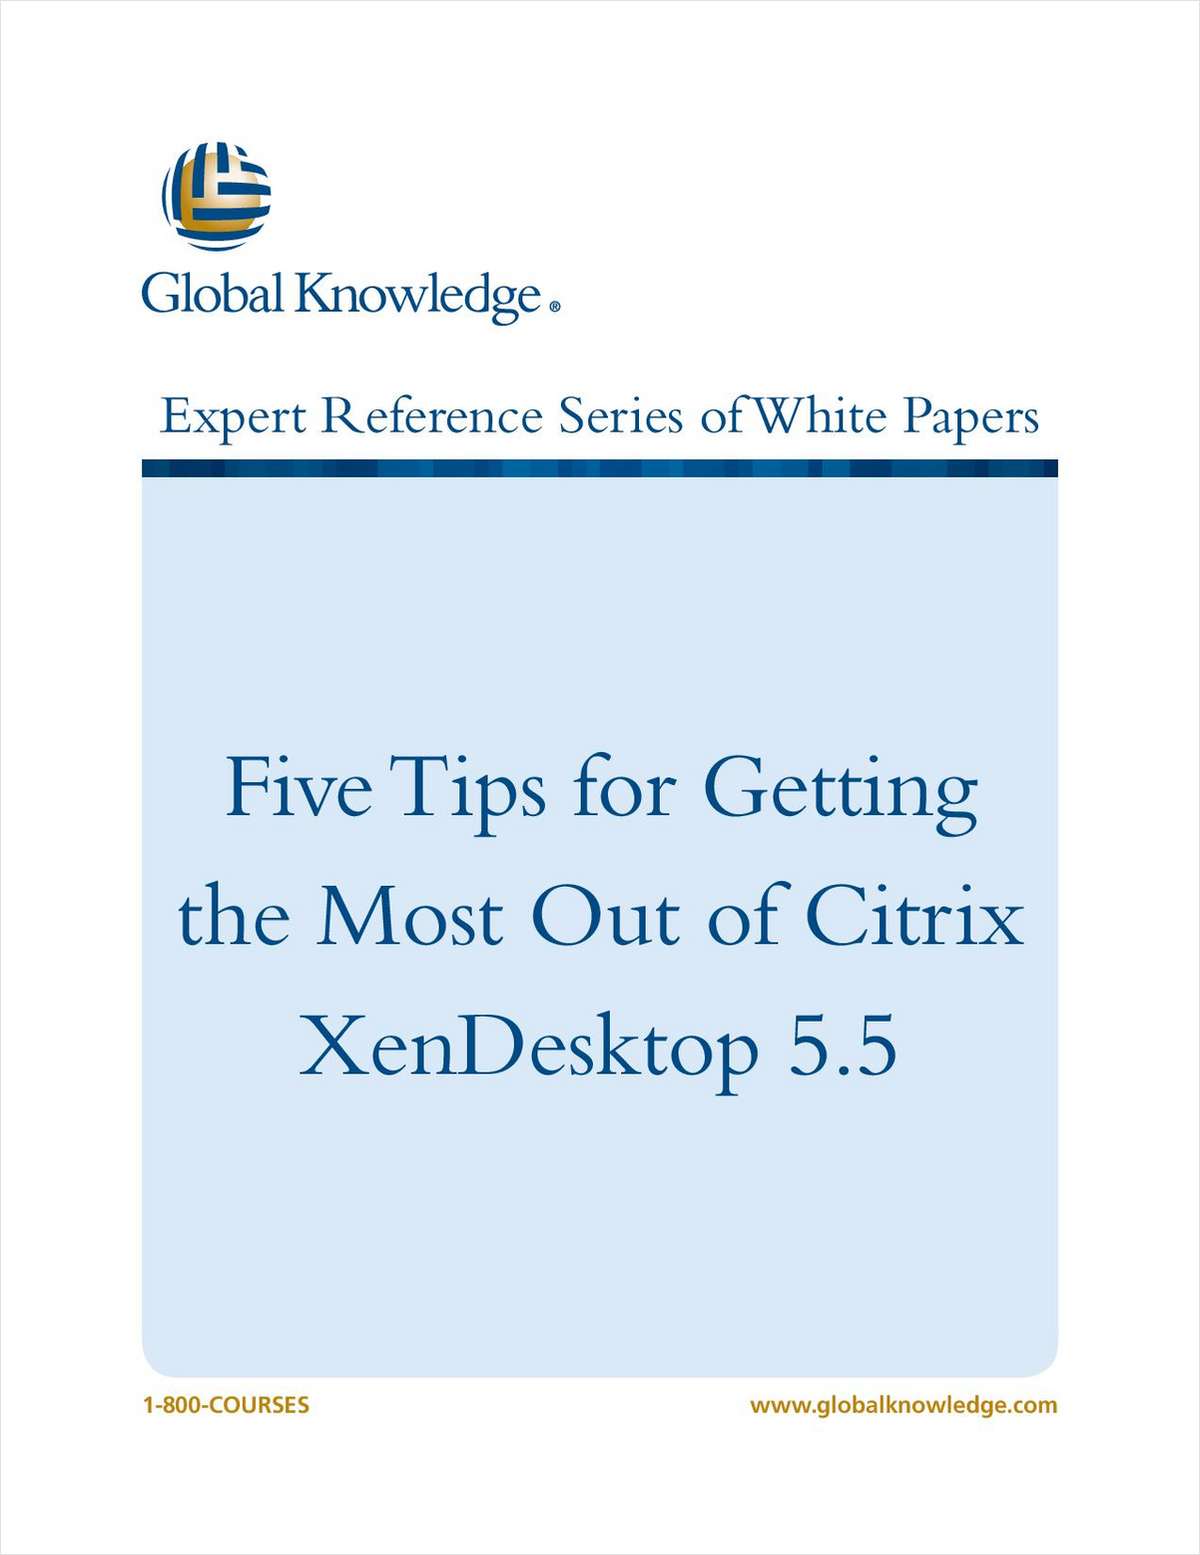 5 Tips for Getting the Most Out of Citrix XenDesktop 5.5